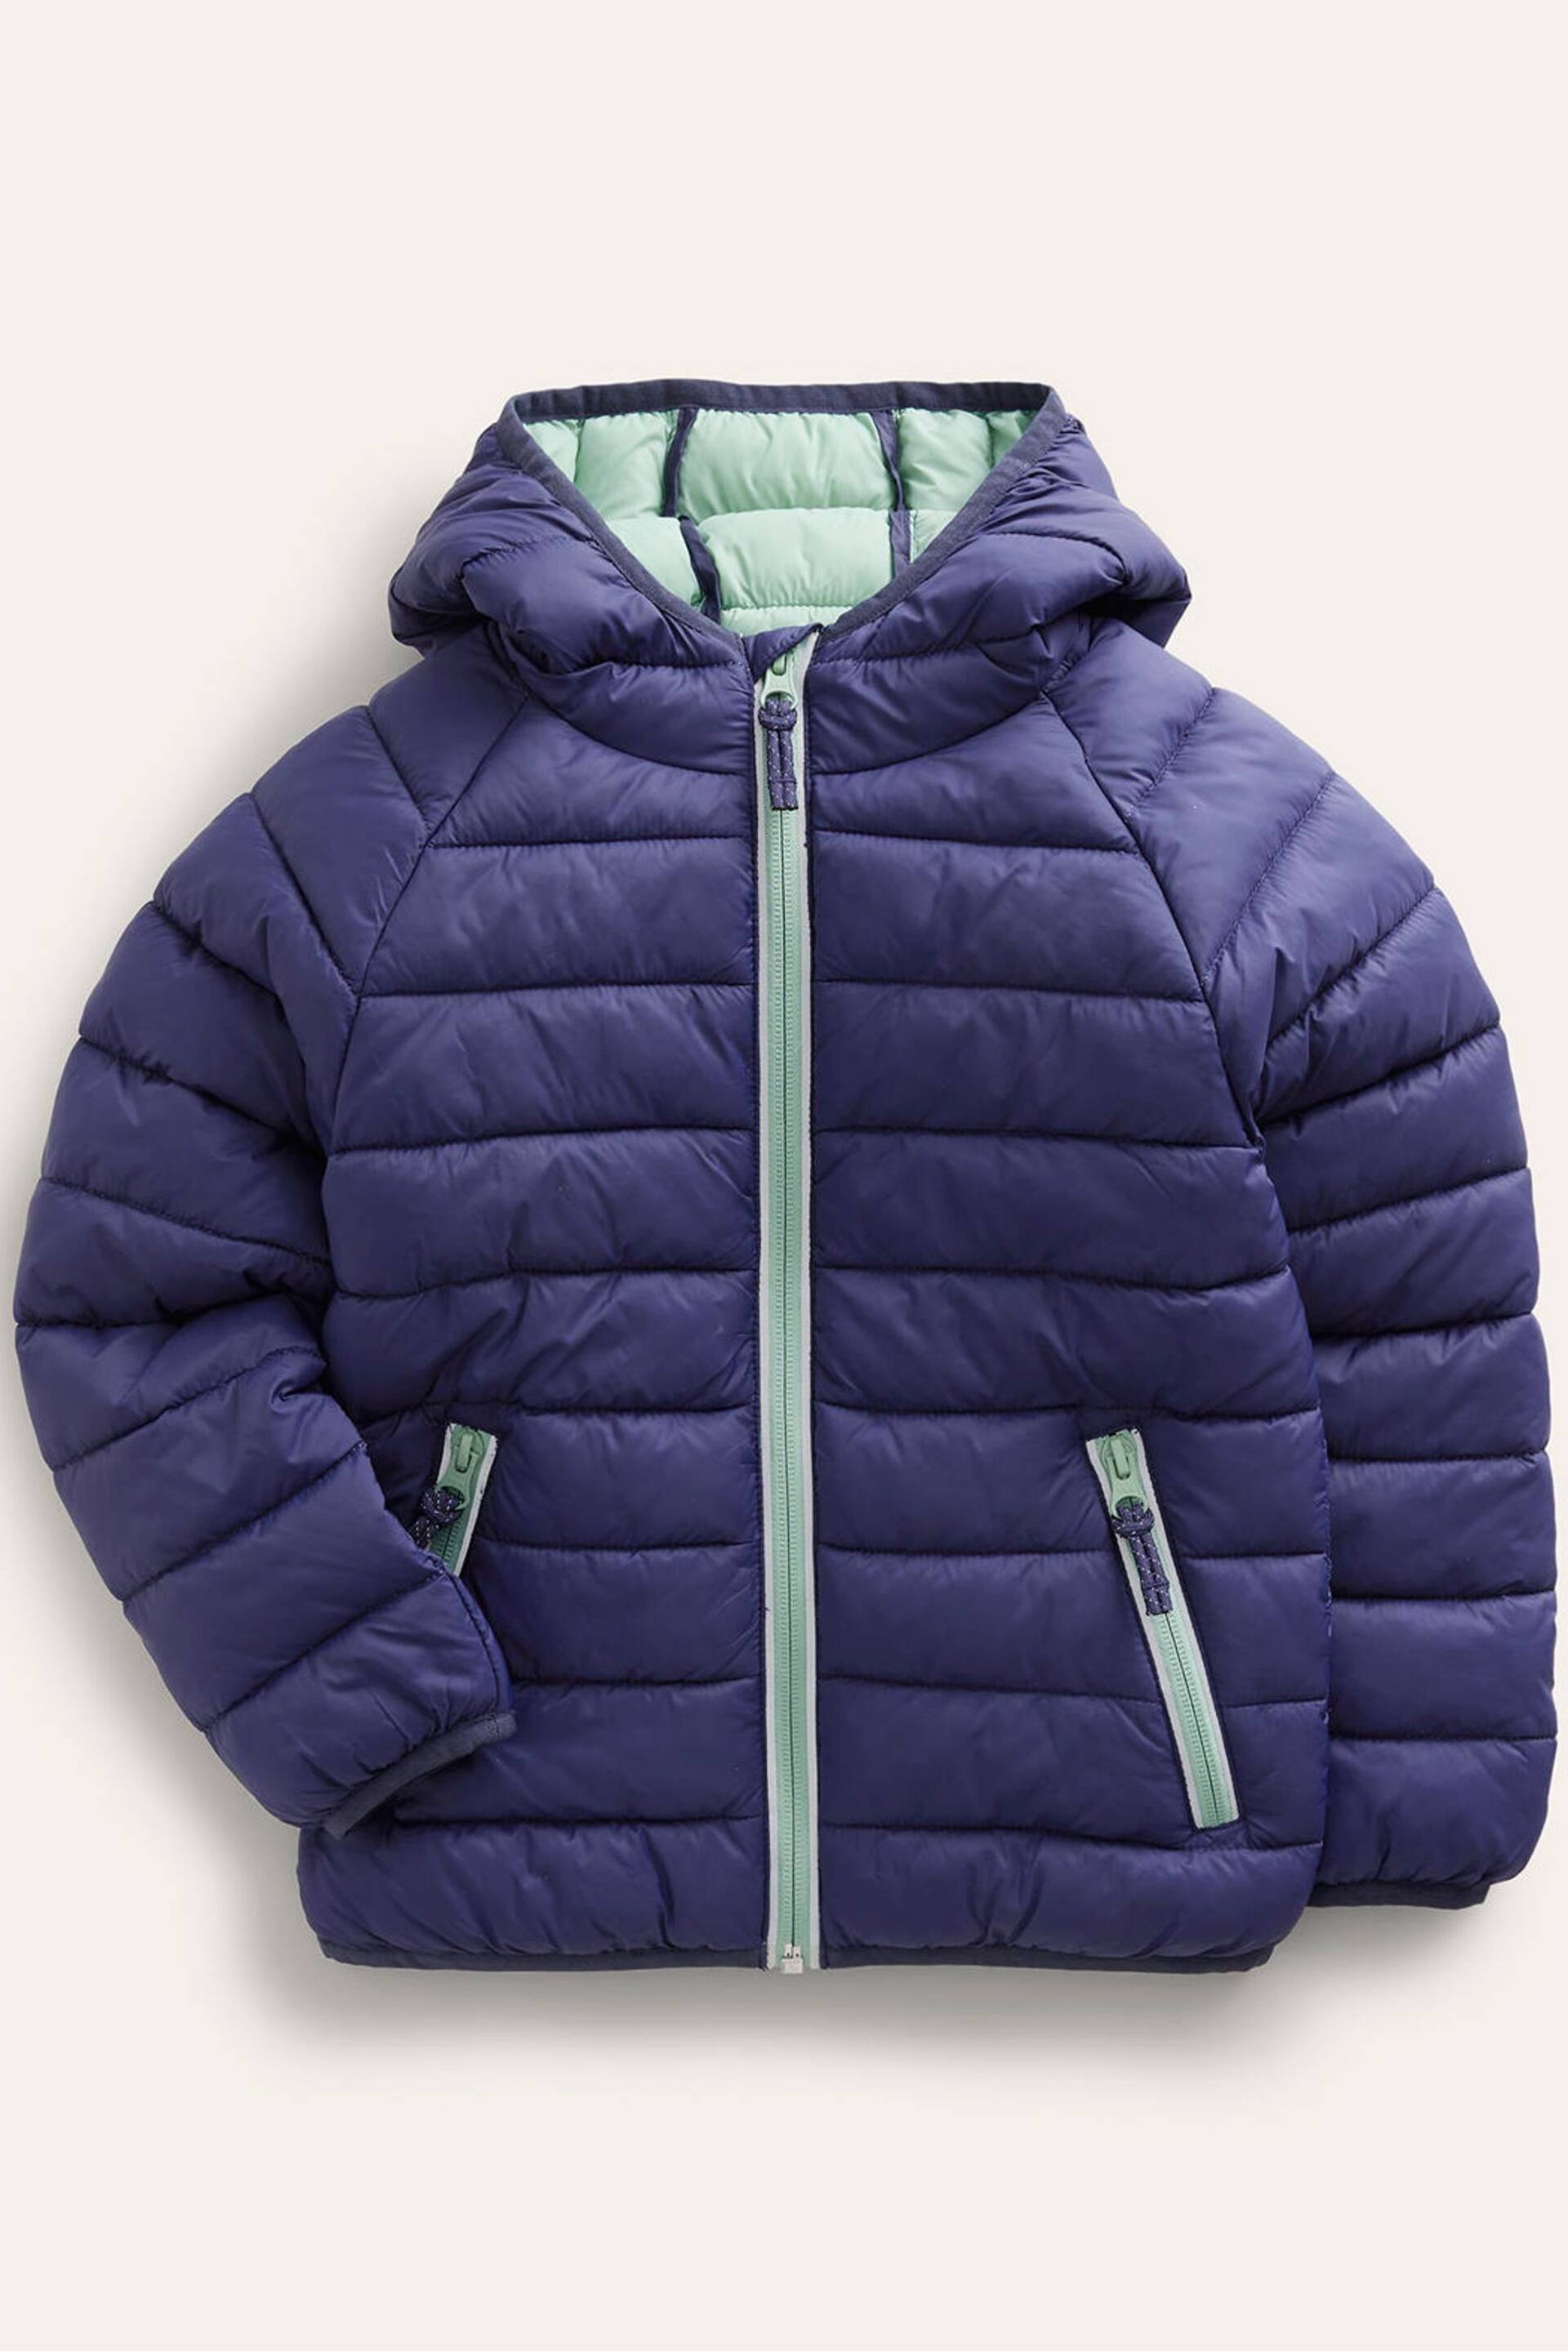 Boden Blue Pack-Away Padded Jacket - Image 1 of 3